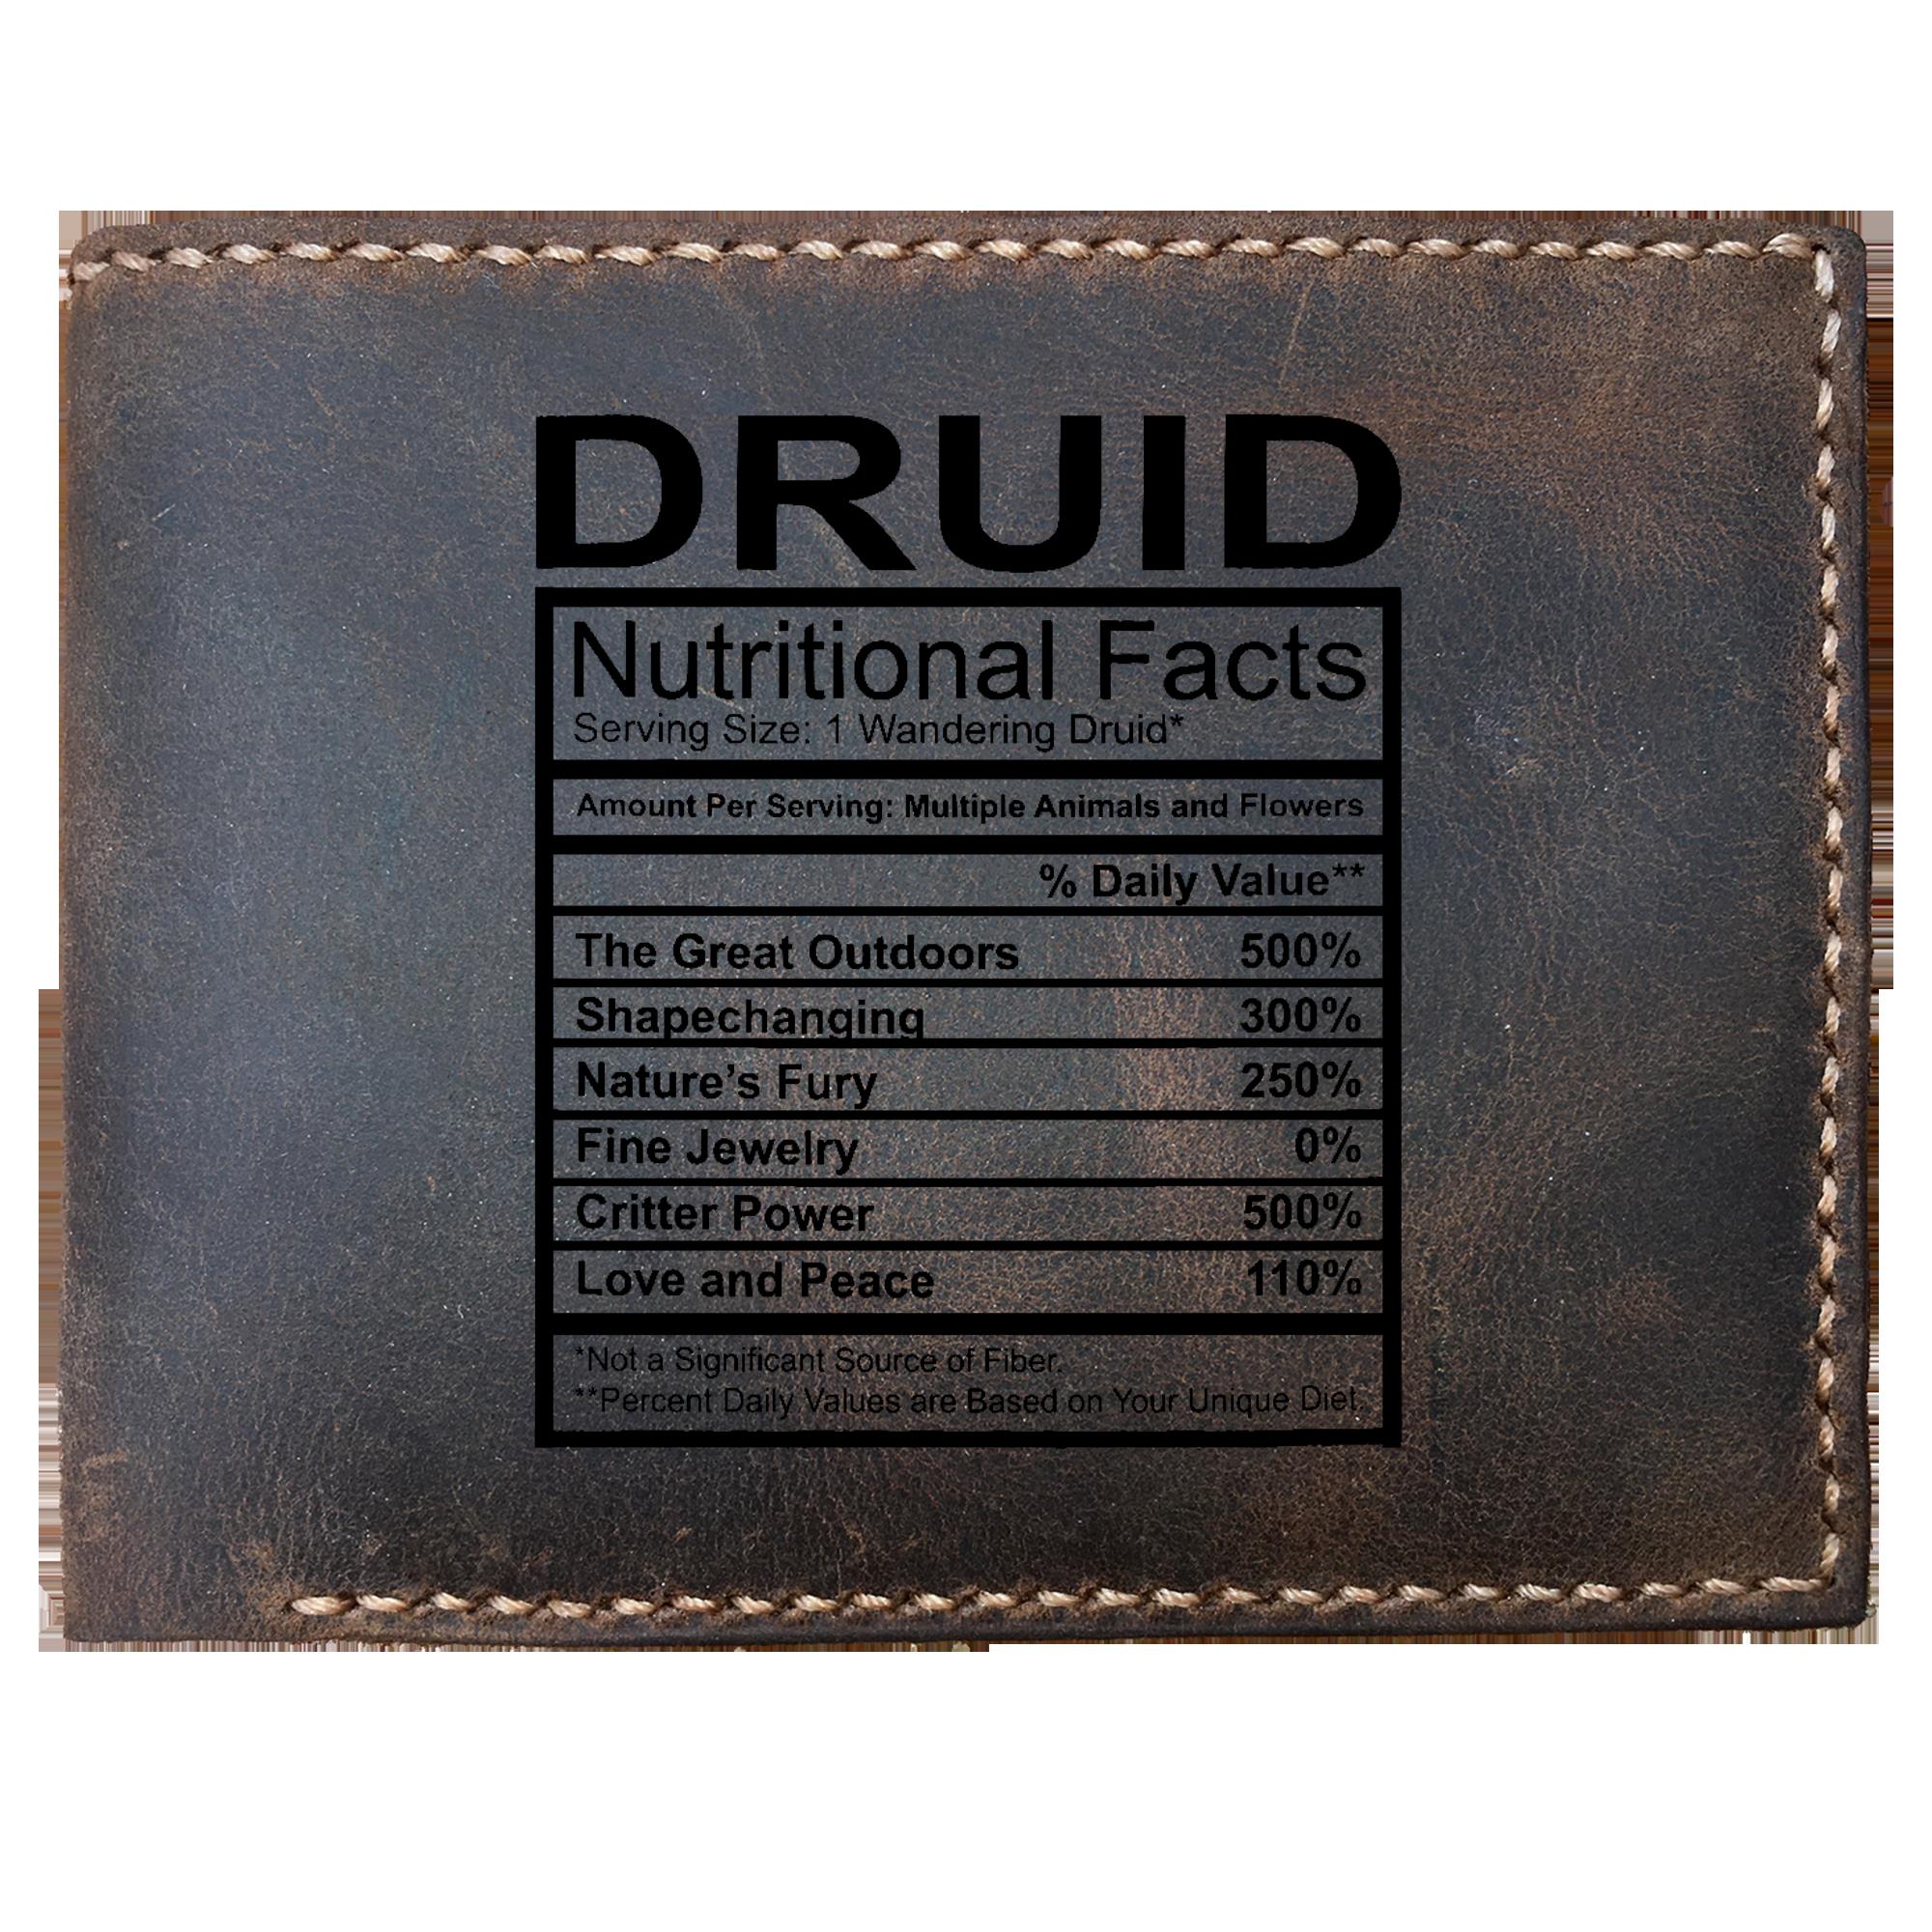 Skitongifts Funny Custom Laser Engraved Bifold Leather Wallet For Men, Dnd Druid Nutritional Facts